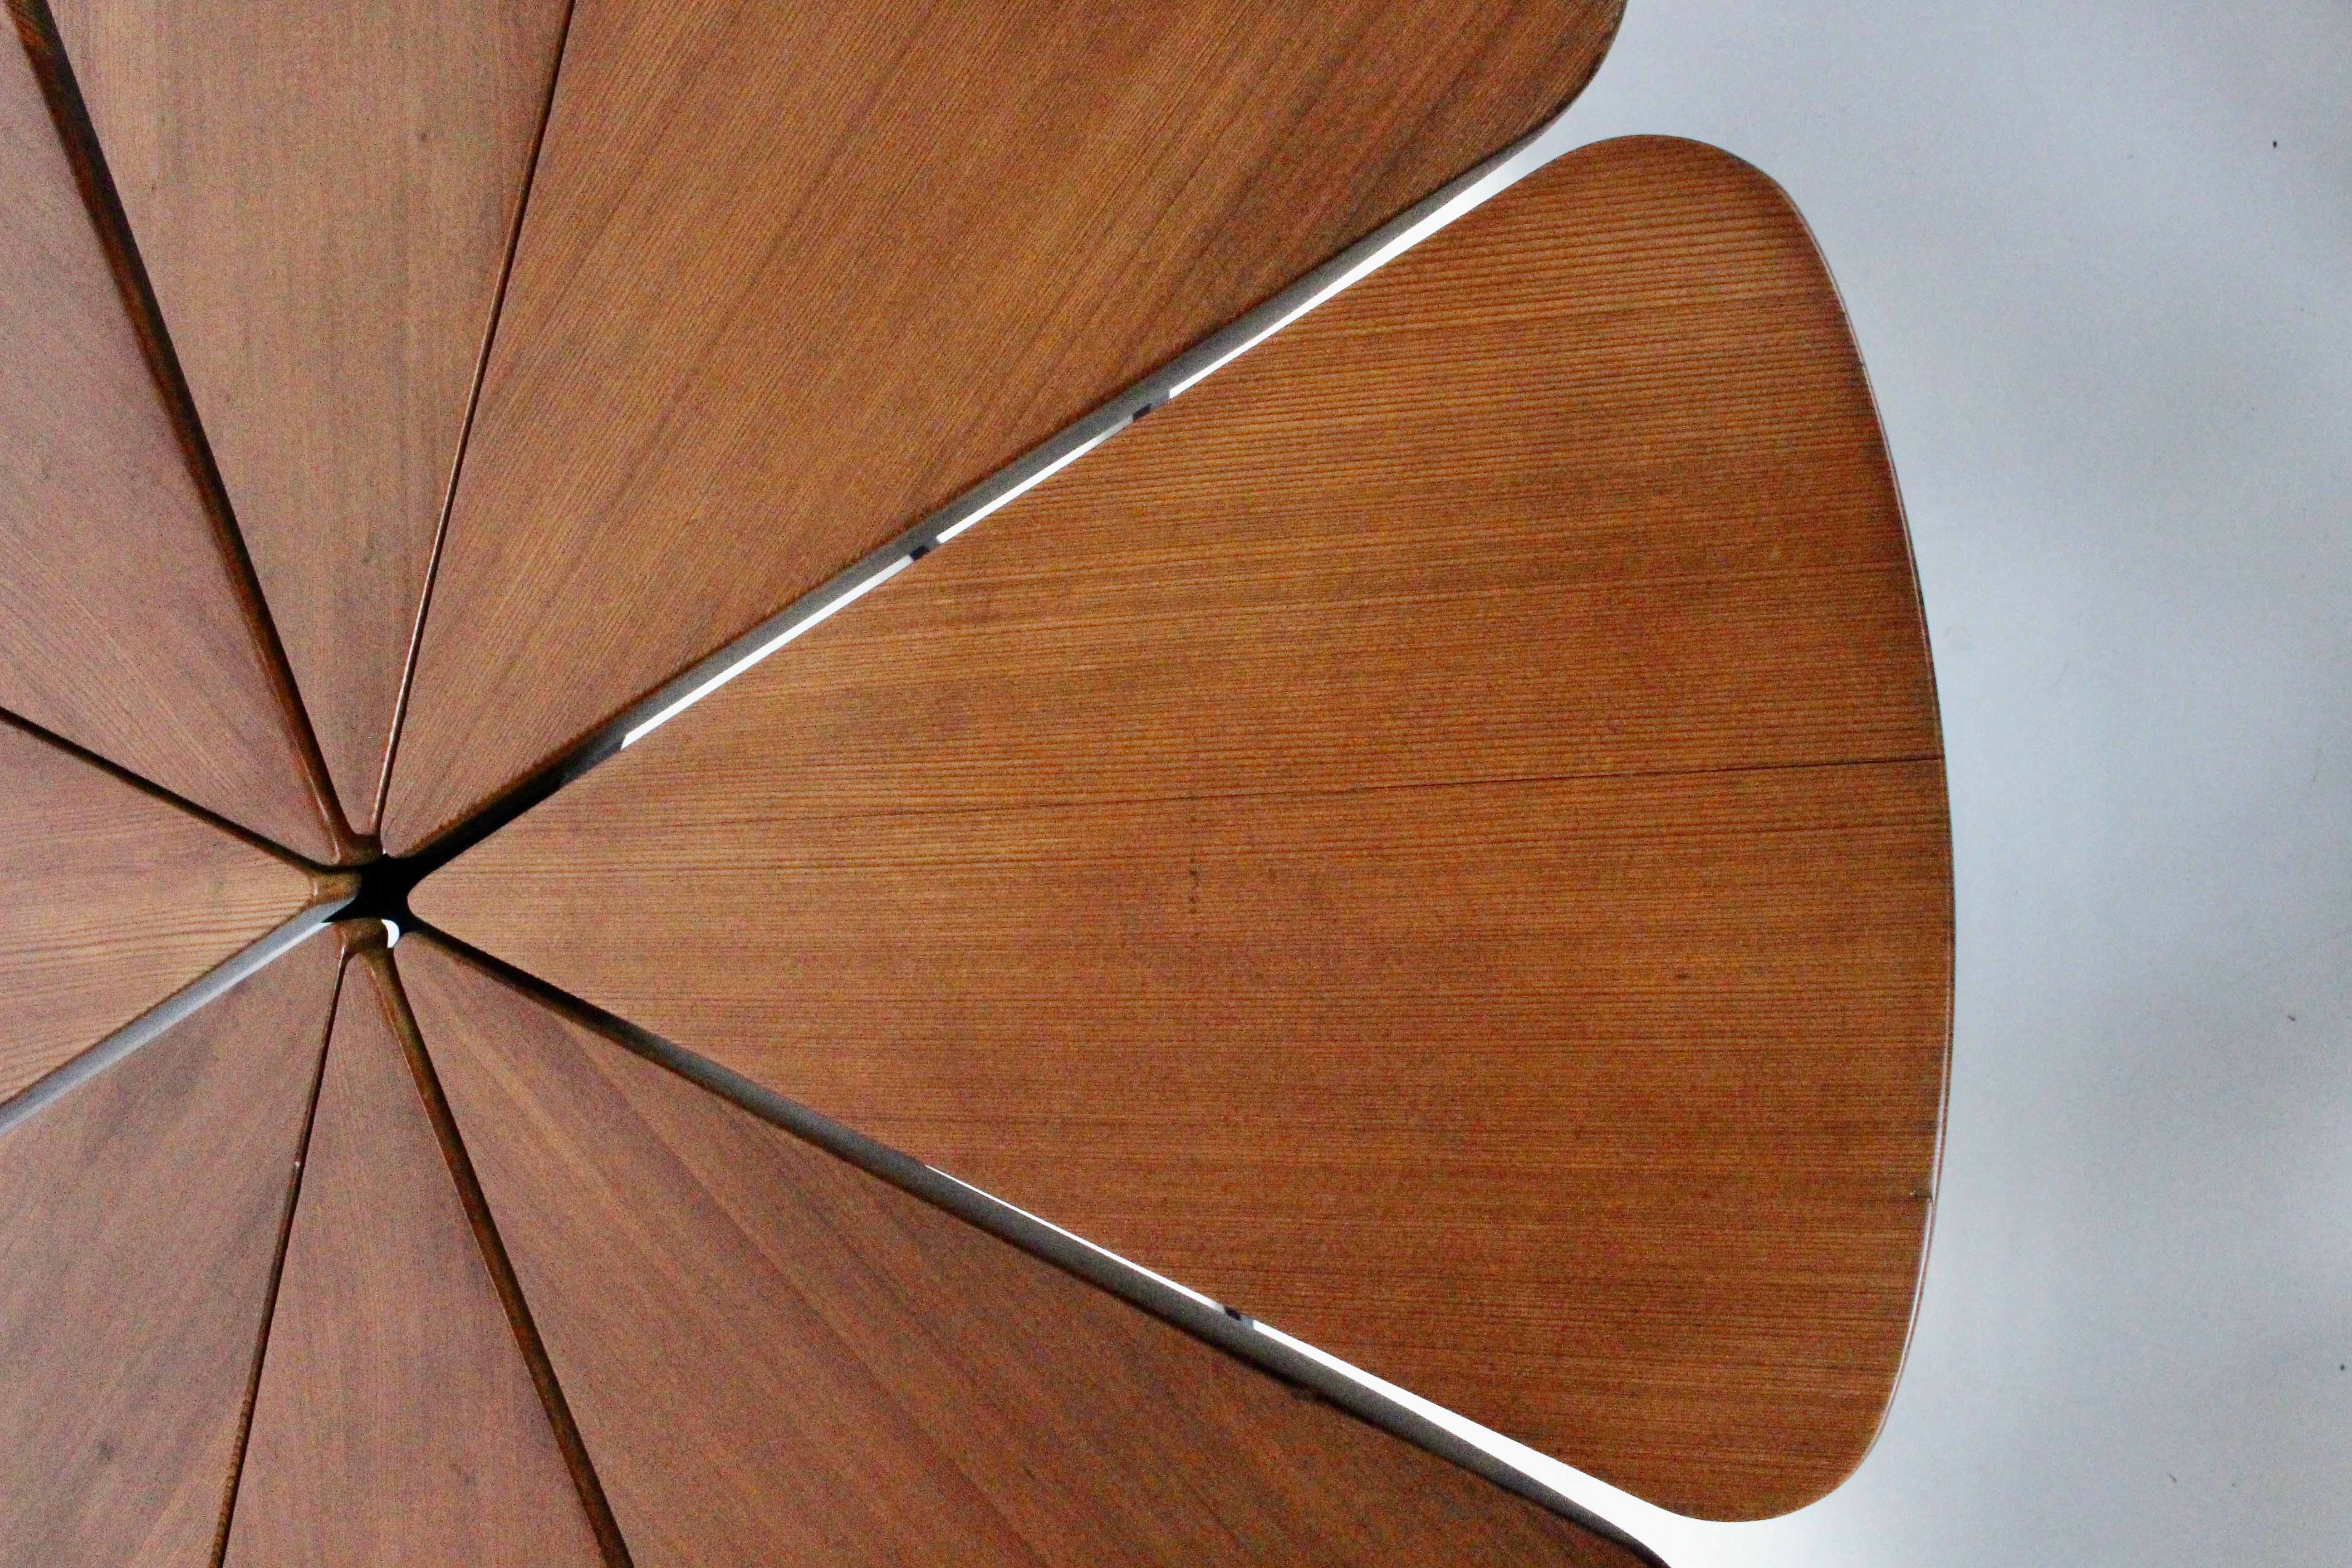 Richard Schultz Petal Dining Table in Red Cedar with Black Enamel Base, 1960's In Good Condition For Sale In Bainbridge, NY